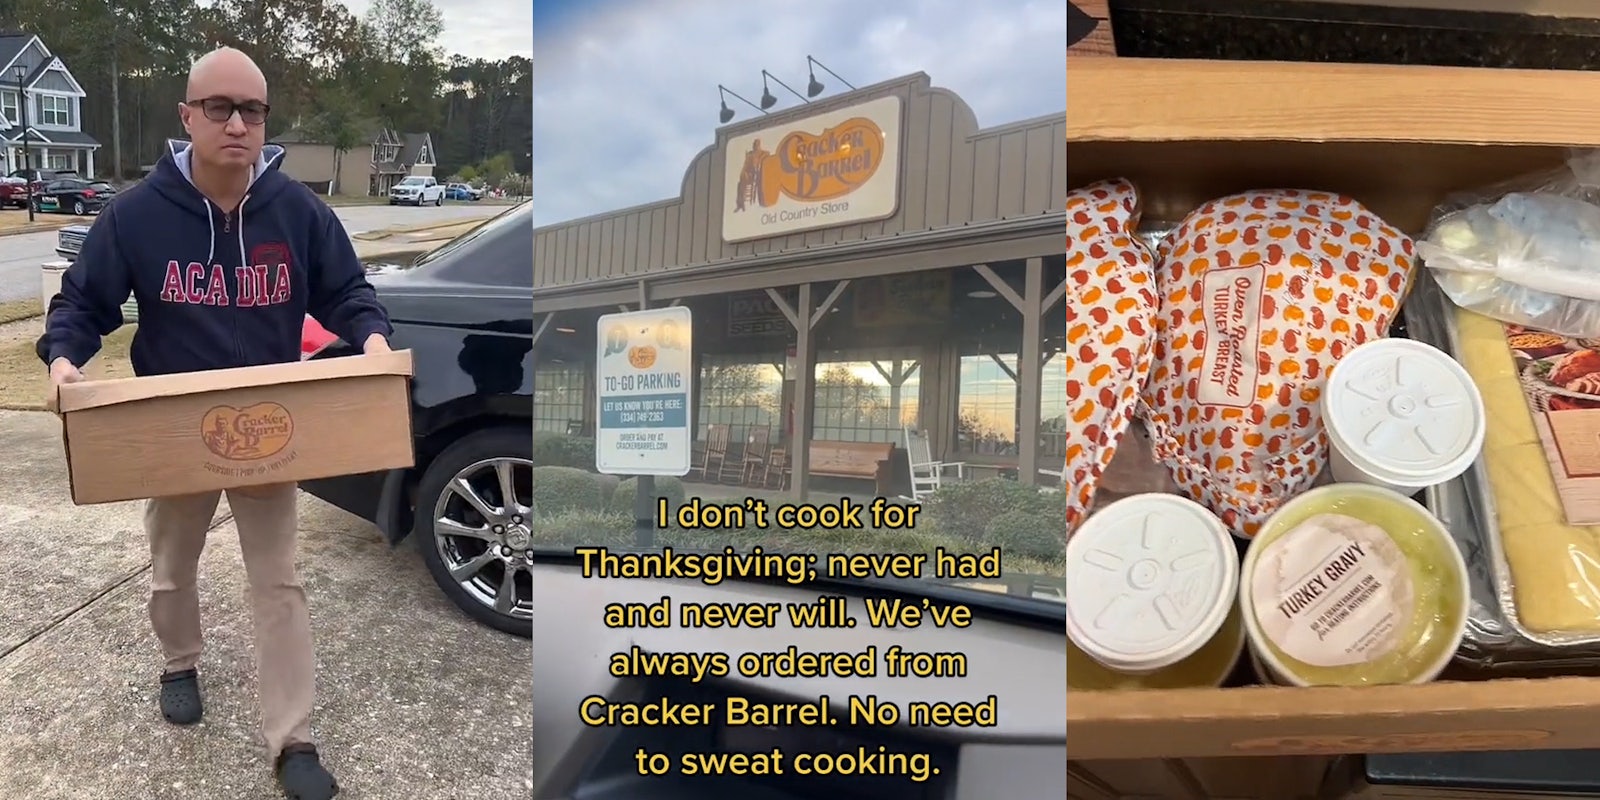 man carrying Cracker Barrel box in driveway (l) view of Cracker Barrel sign from car windshield caption 'I don't cook for Thanksgiving; never had and never will. We've always ordered from Cracker Barrel. No need to sweat cooking.' (c) Cracker Barrel Thanksgiving meal in box (r)